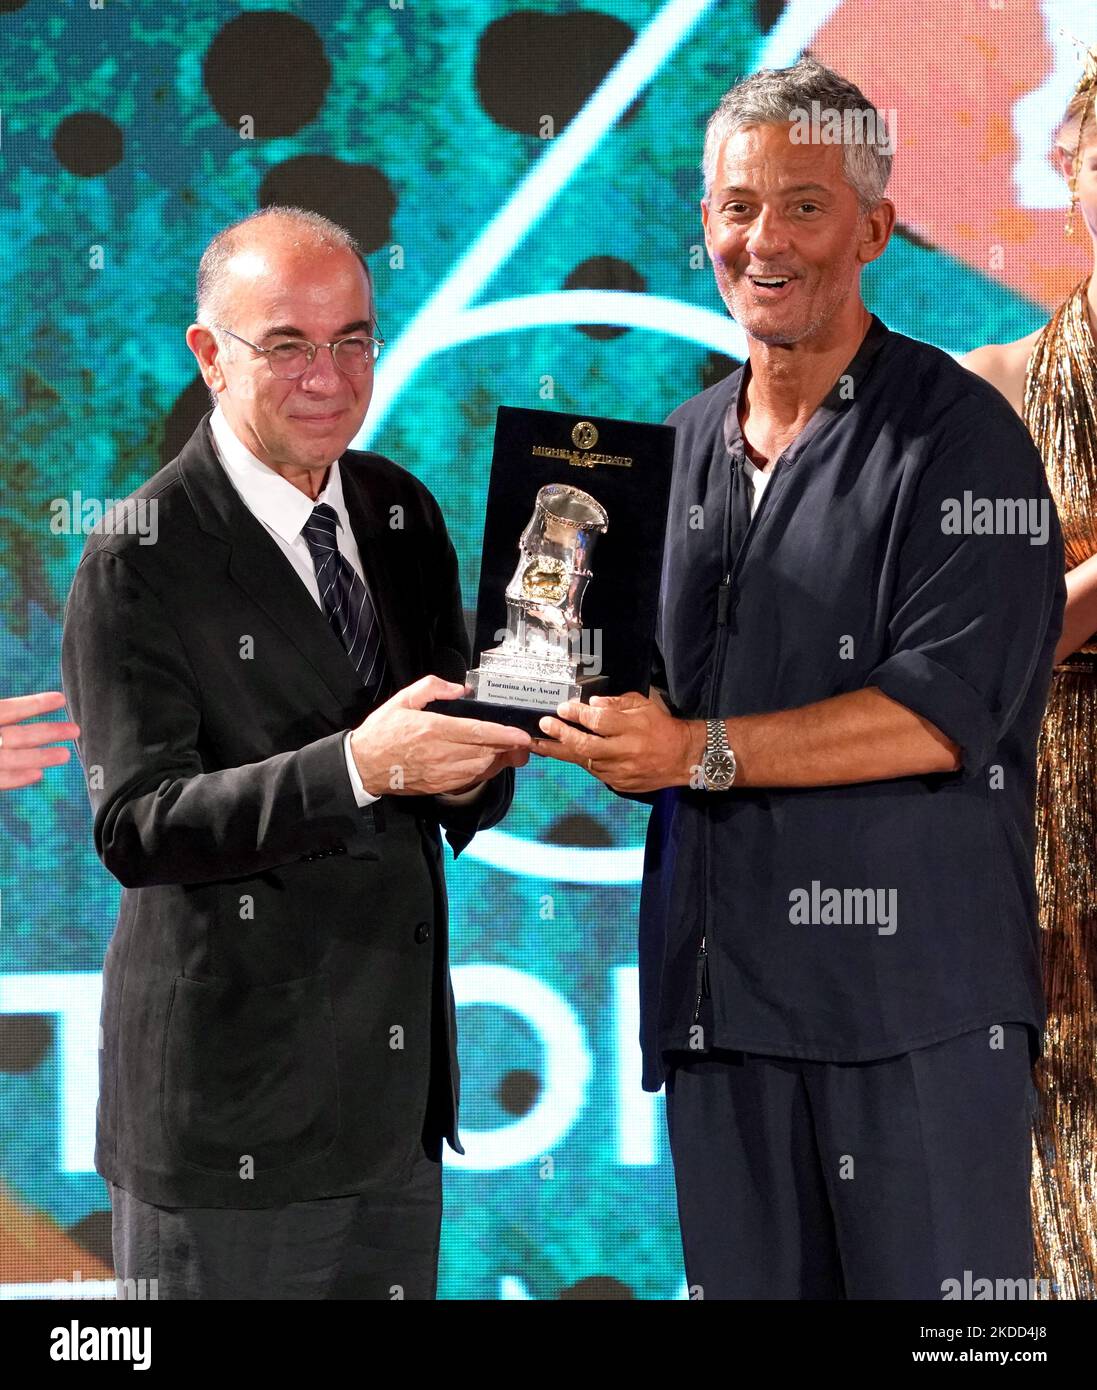 Rosario Fiorello and Giuseppe Tornatore on the stage of the Ancient Theater of Taormina. Final evening of the 68th edition of the Taormina Film Festival dedicated to the maestro Ennio Morricone. 68th Taorminafilmfest, Taormina (ME), Italy, on July 02, 2022 (Photo by Gabriele Maricchiolo/NurPhoto) Stock Photo